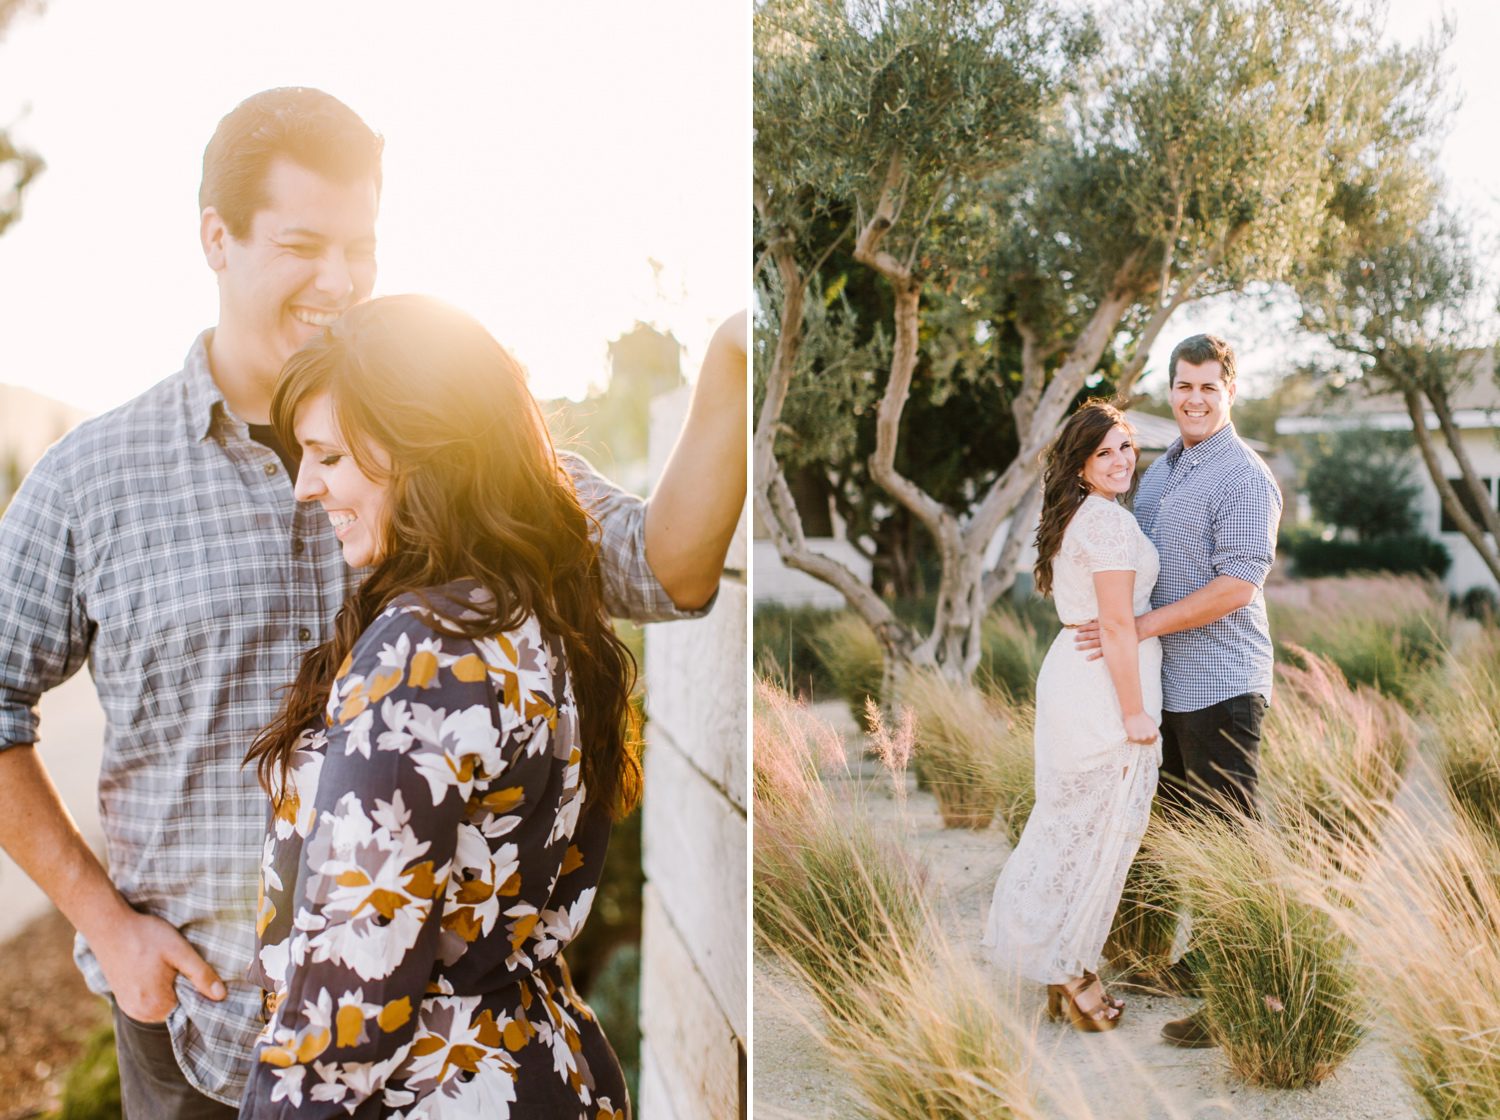 Biddle Ranch Engagement session and wedding by San Luis Obispo photographer Jessica Sofranko